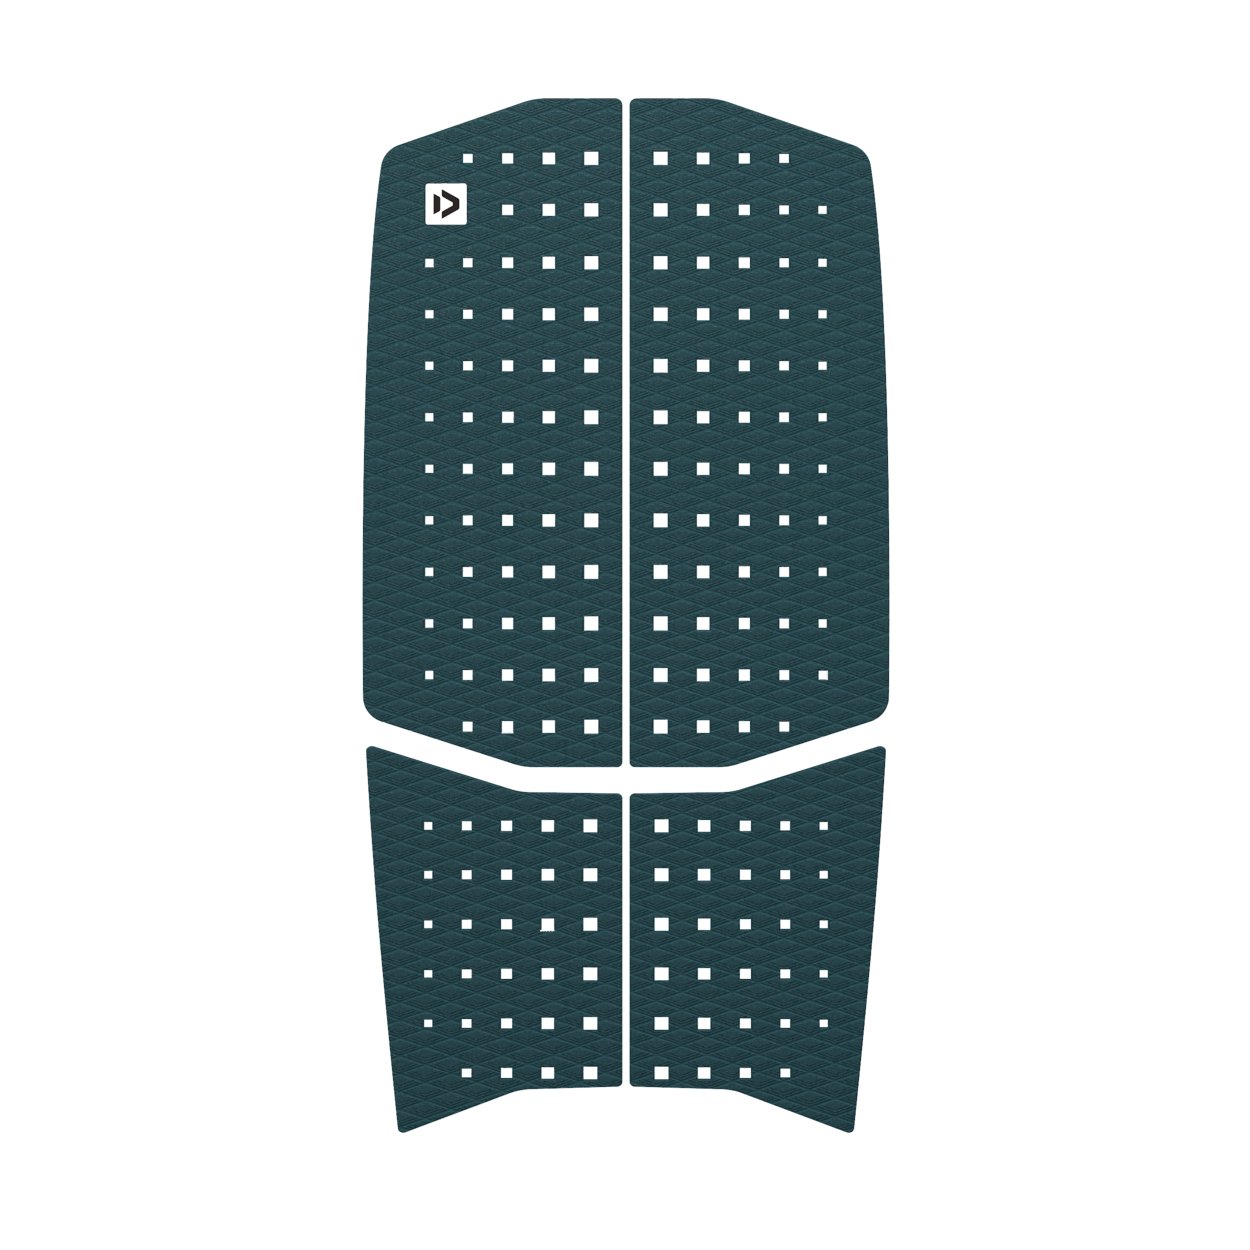 Duotone Traction Pad Pro Front 2024 - Worthing Watersports - 9008415856244 - Surfboards - Duotone Kiteboarding